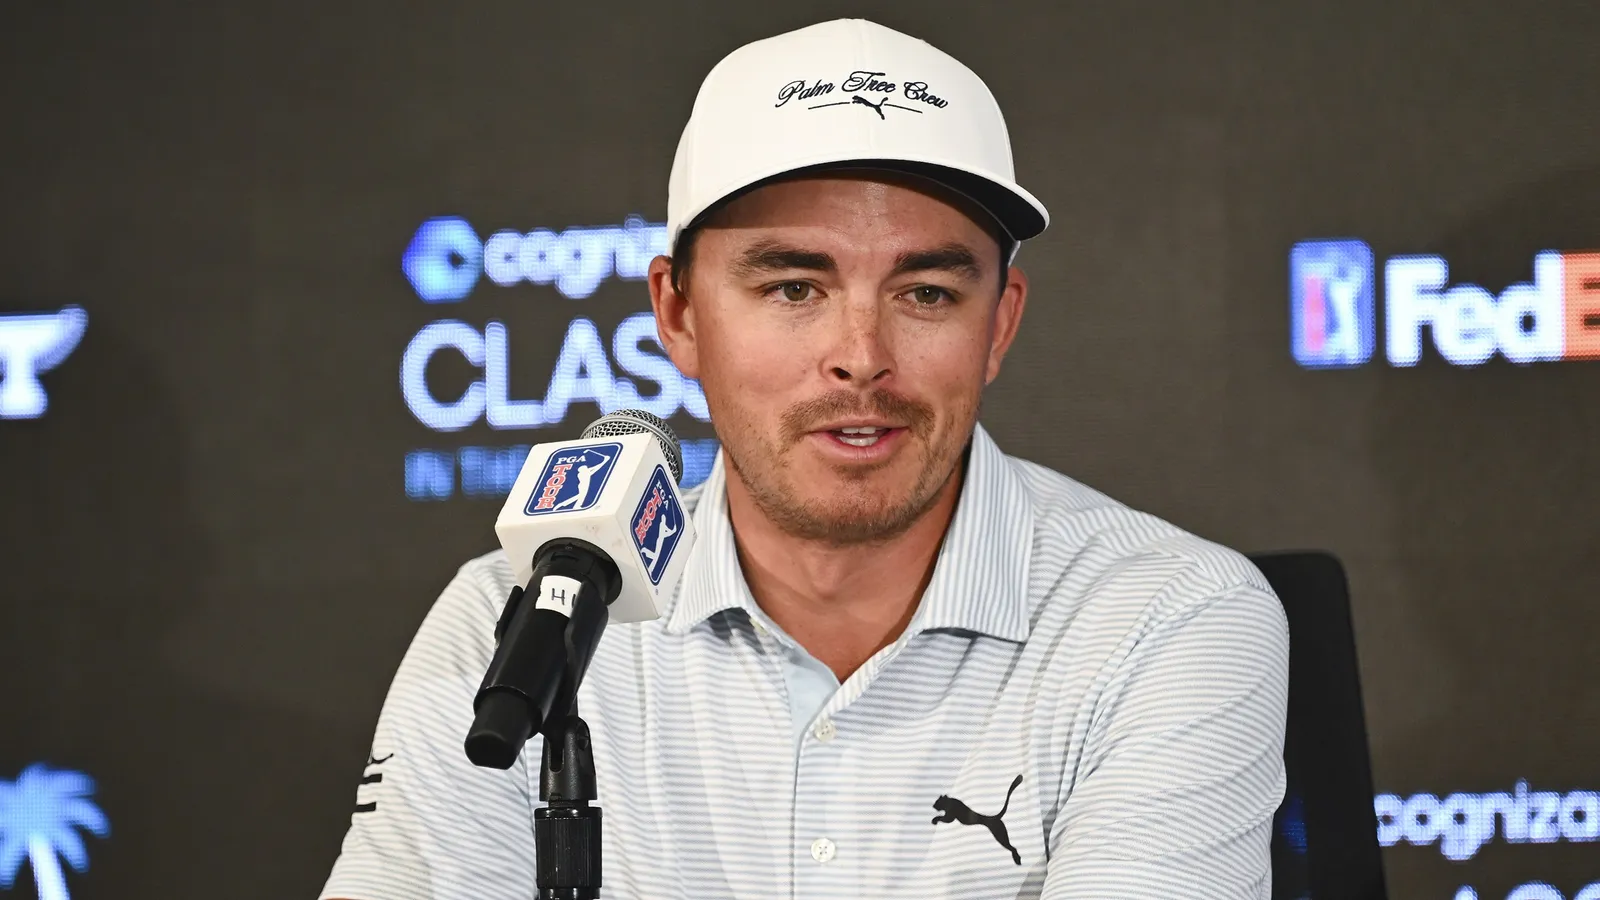 Is There Too Much Golf On TV? Rickie Fowler Floats Off-Season Idea